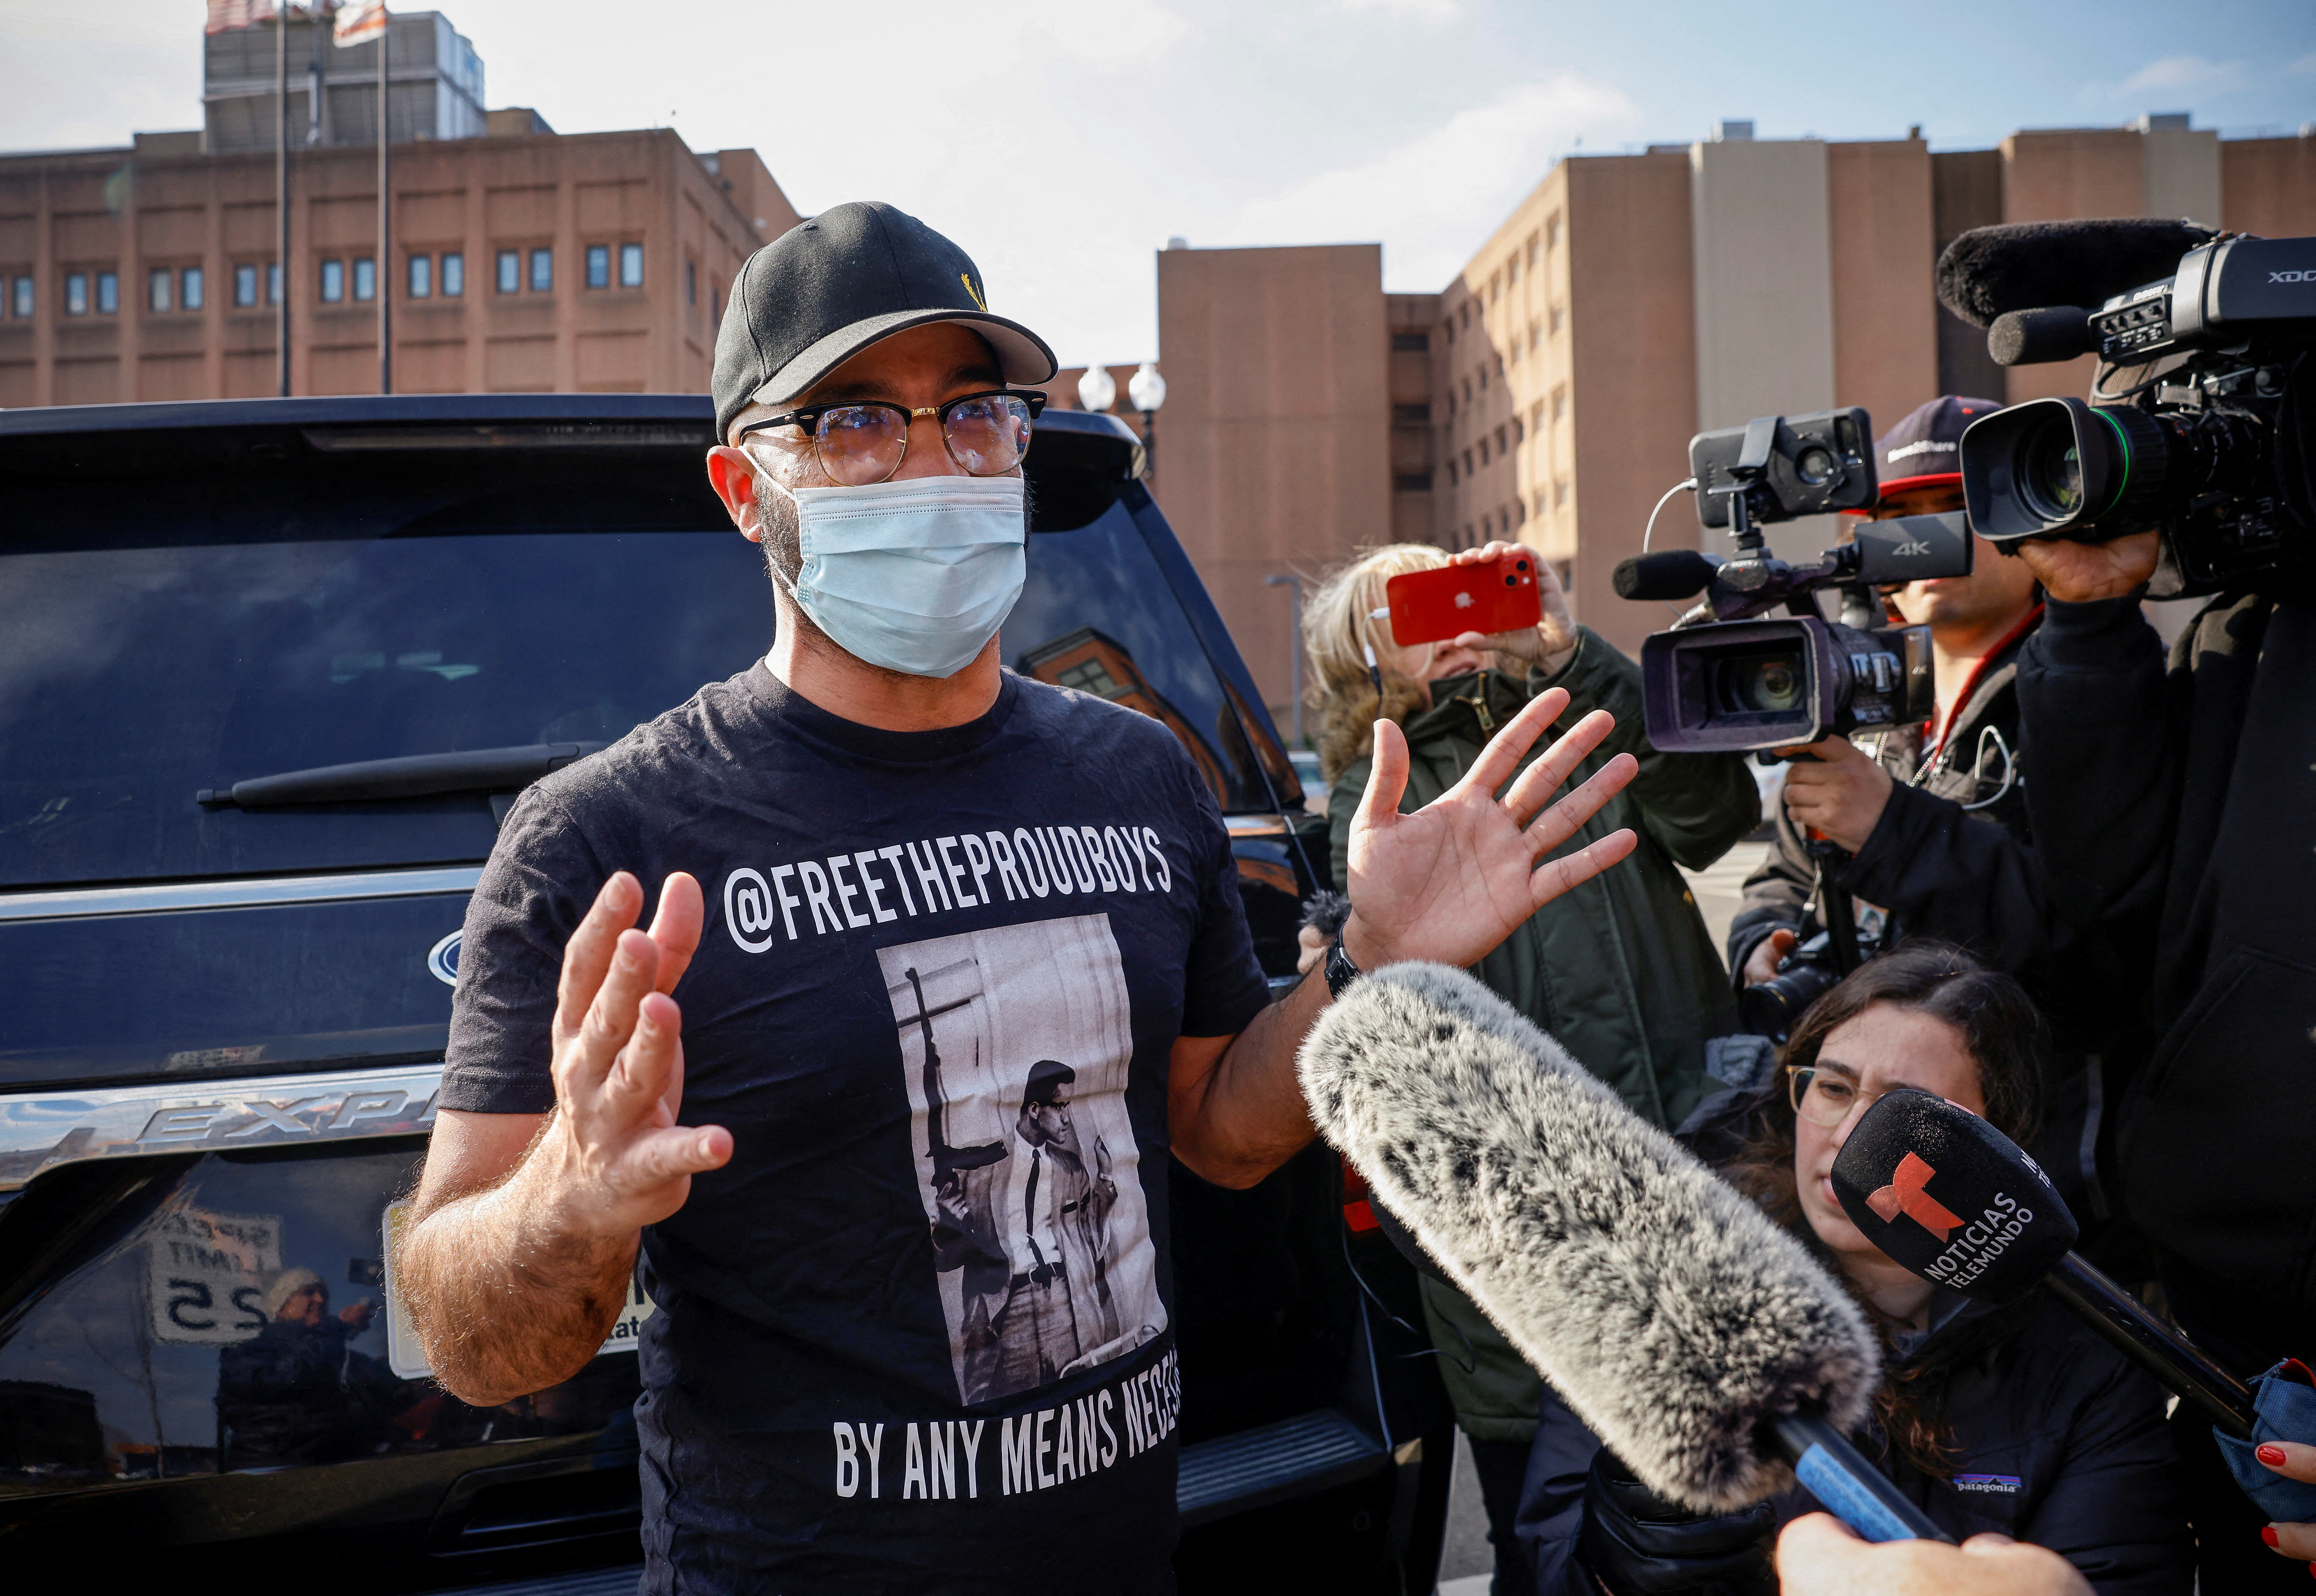 Proud Boys leader Enrique Tarrio speaks to the media following his release from the D.C. Central Detention Facility where he has been held since September 2021, in Washington, U.S., January 14, 2022. REUTERS/Evelyn Hockstein